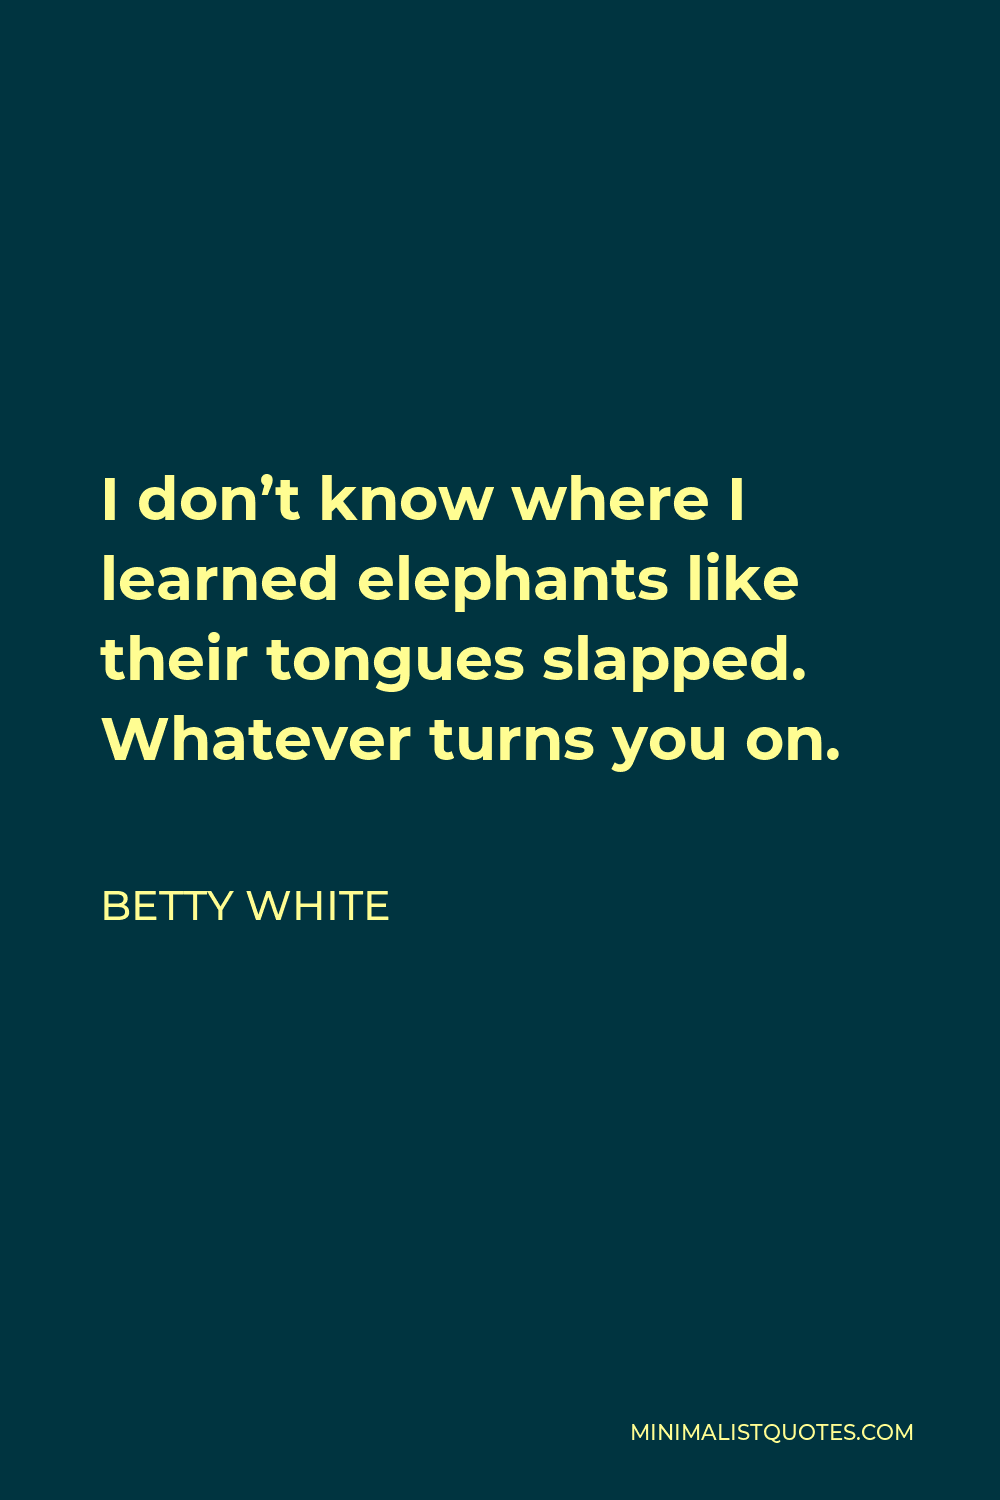 Betty White Quote - I don’t know where I learned elephants like their tongues slapped. Whatever turns you on.